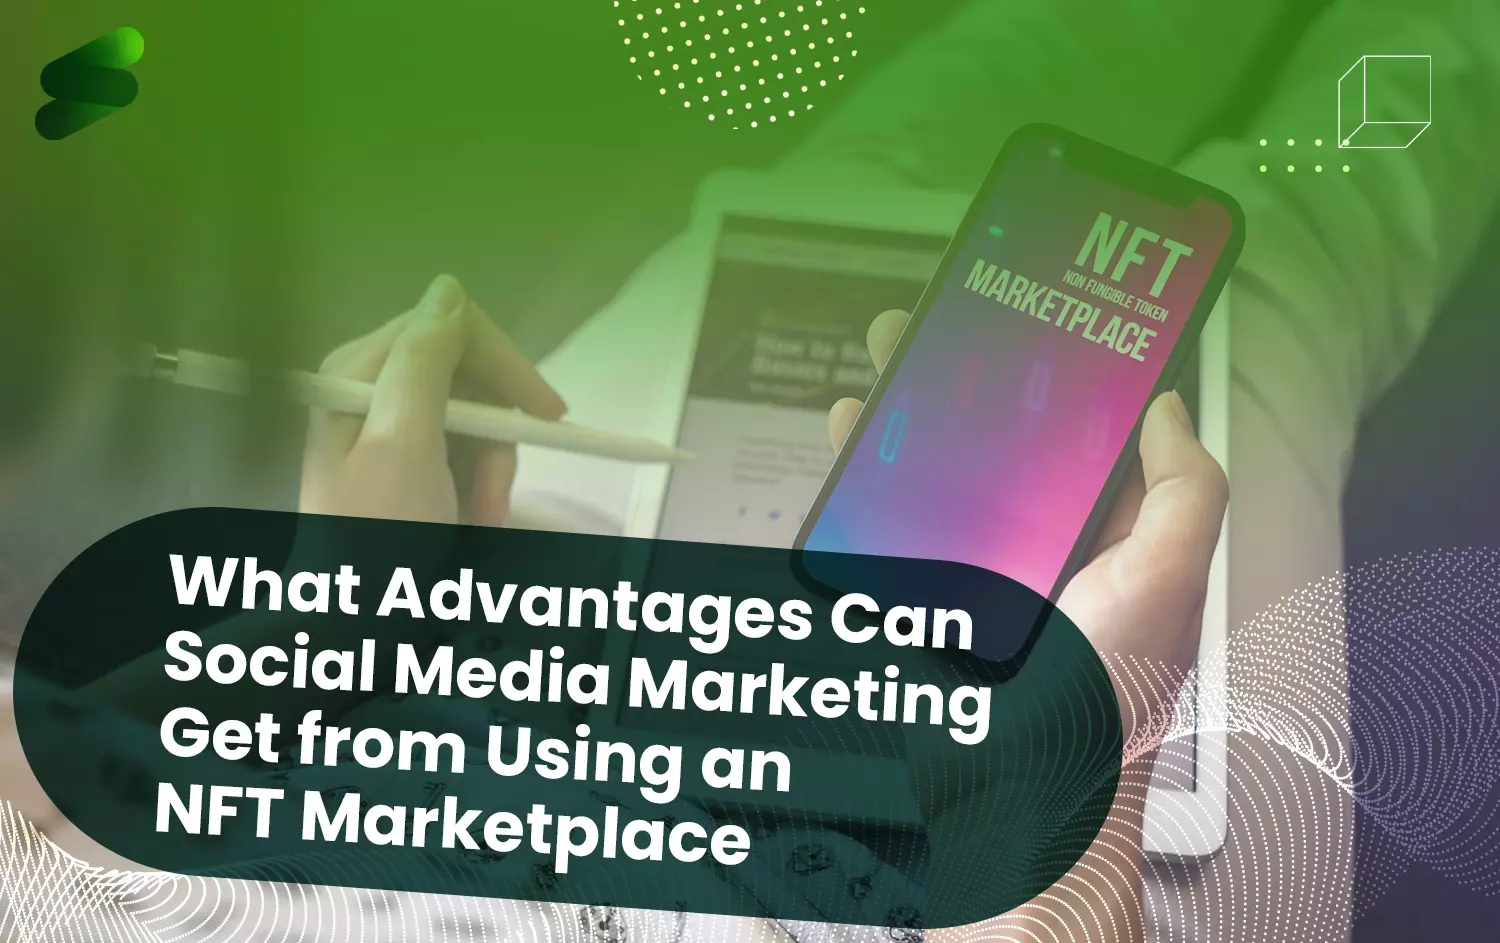 Social Media Marketing Get from Using an NFT Marketplace